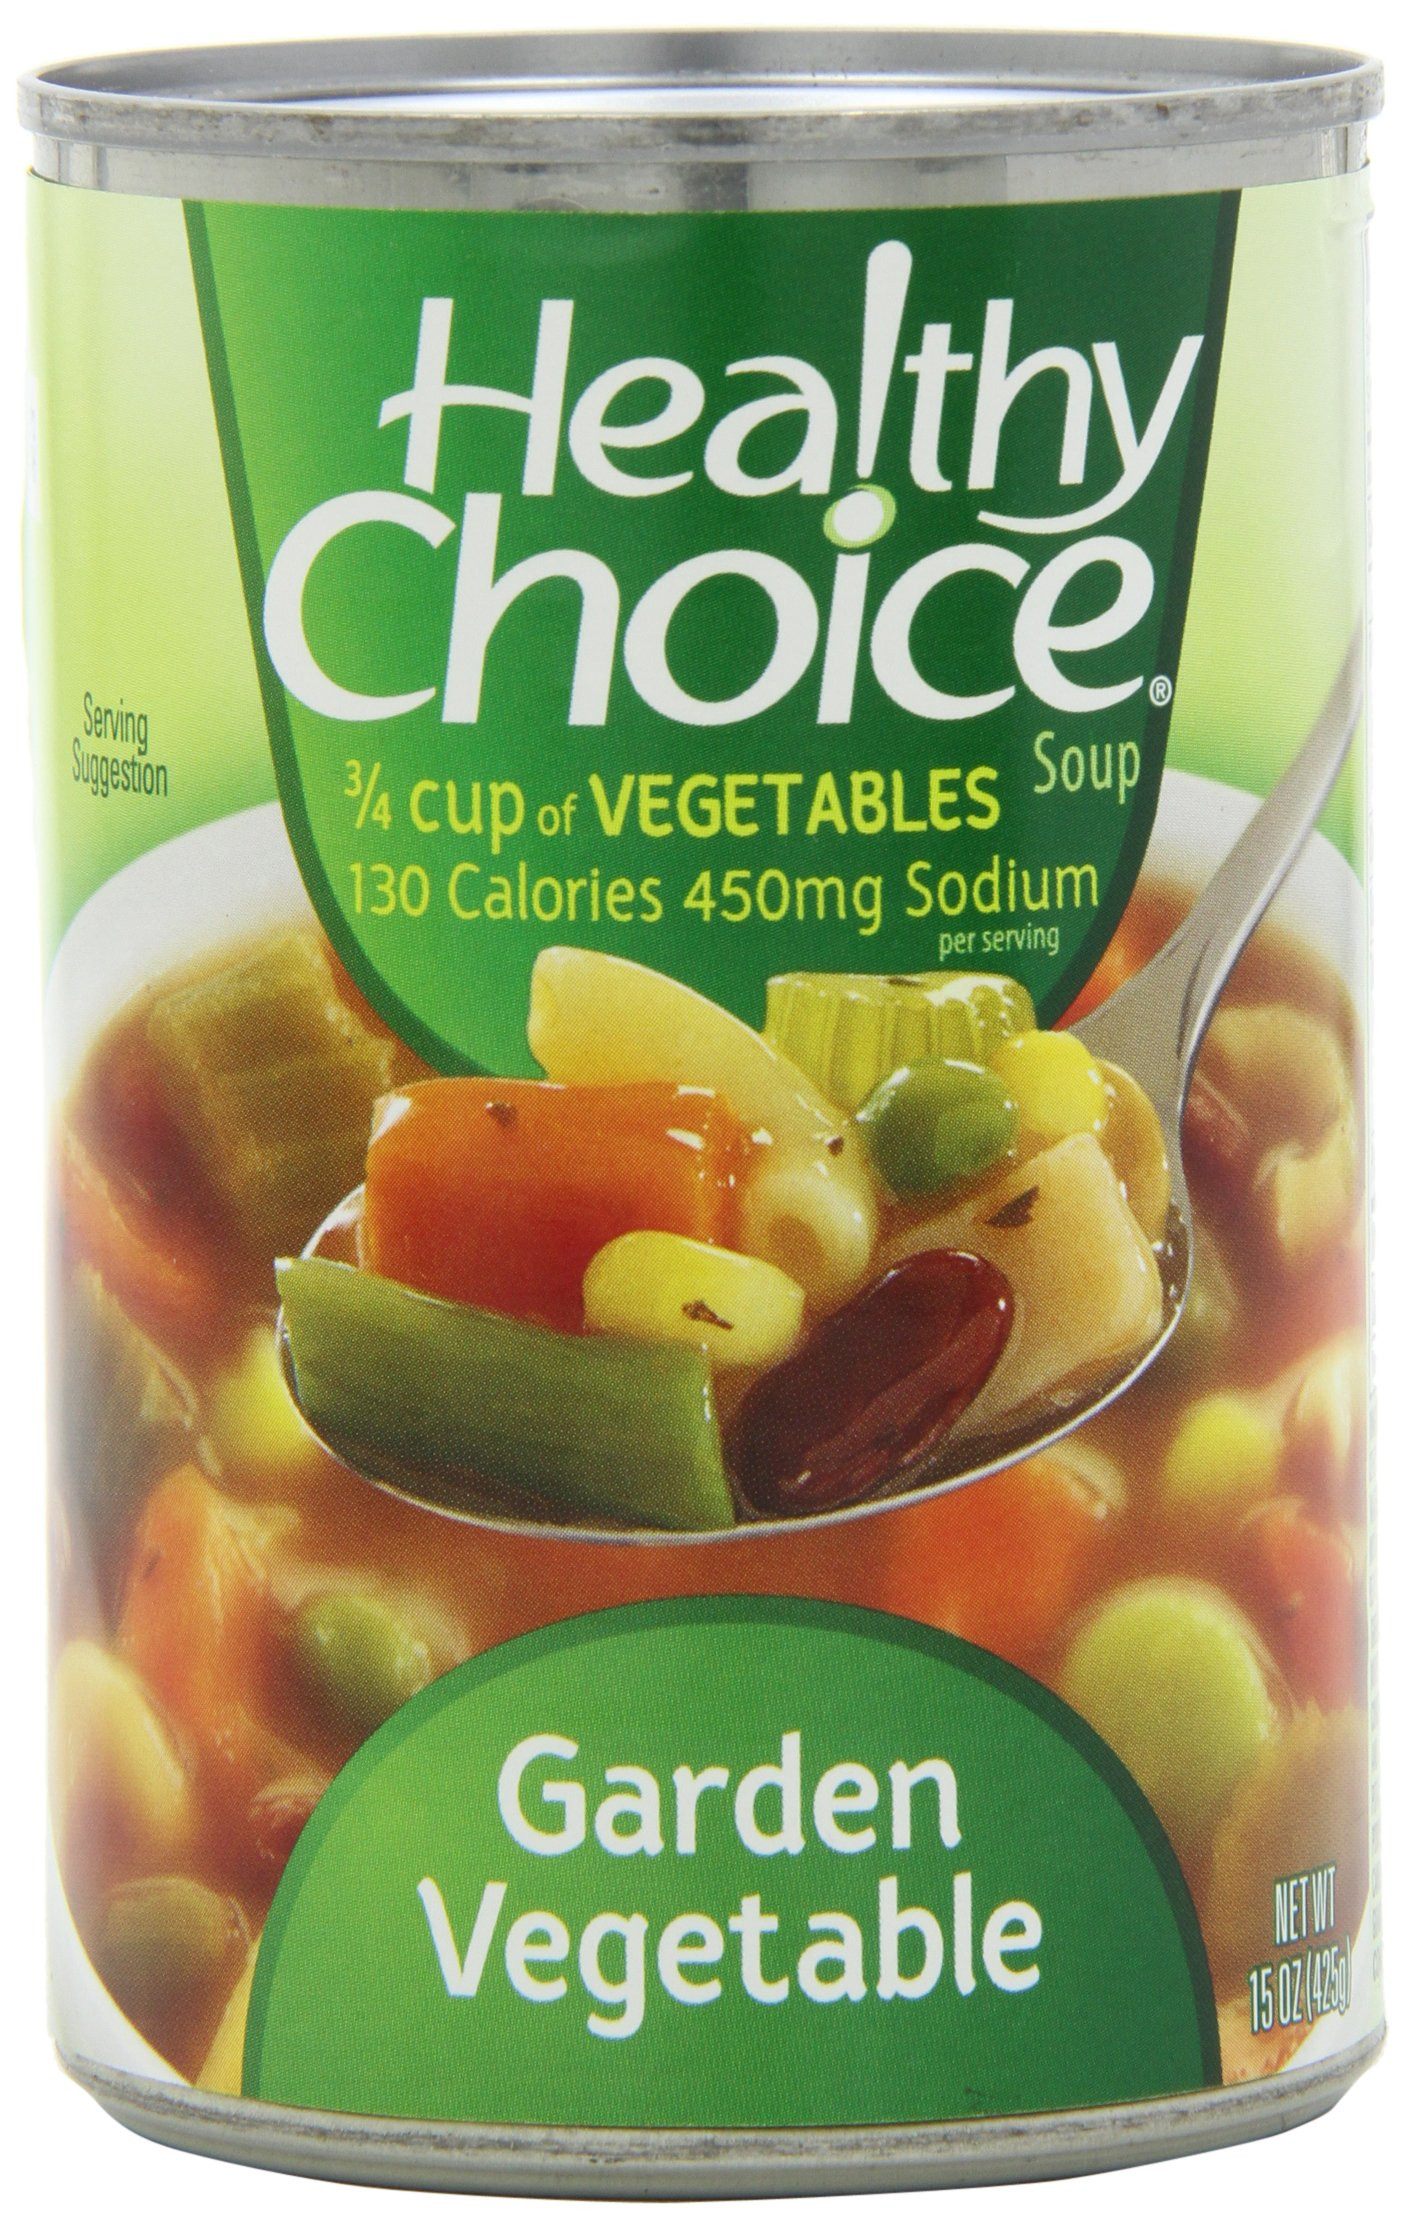 Healthy Choice Chicken Noodle Soup
 Amazon Healthy Choice Chicken Soup Variety 15 oz 10